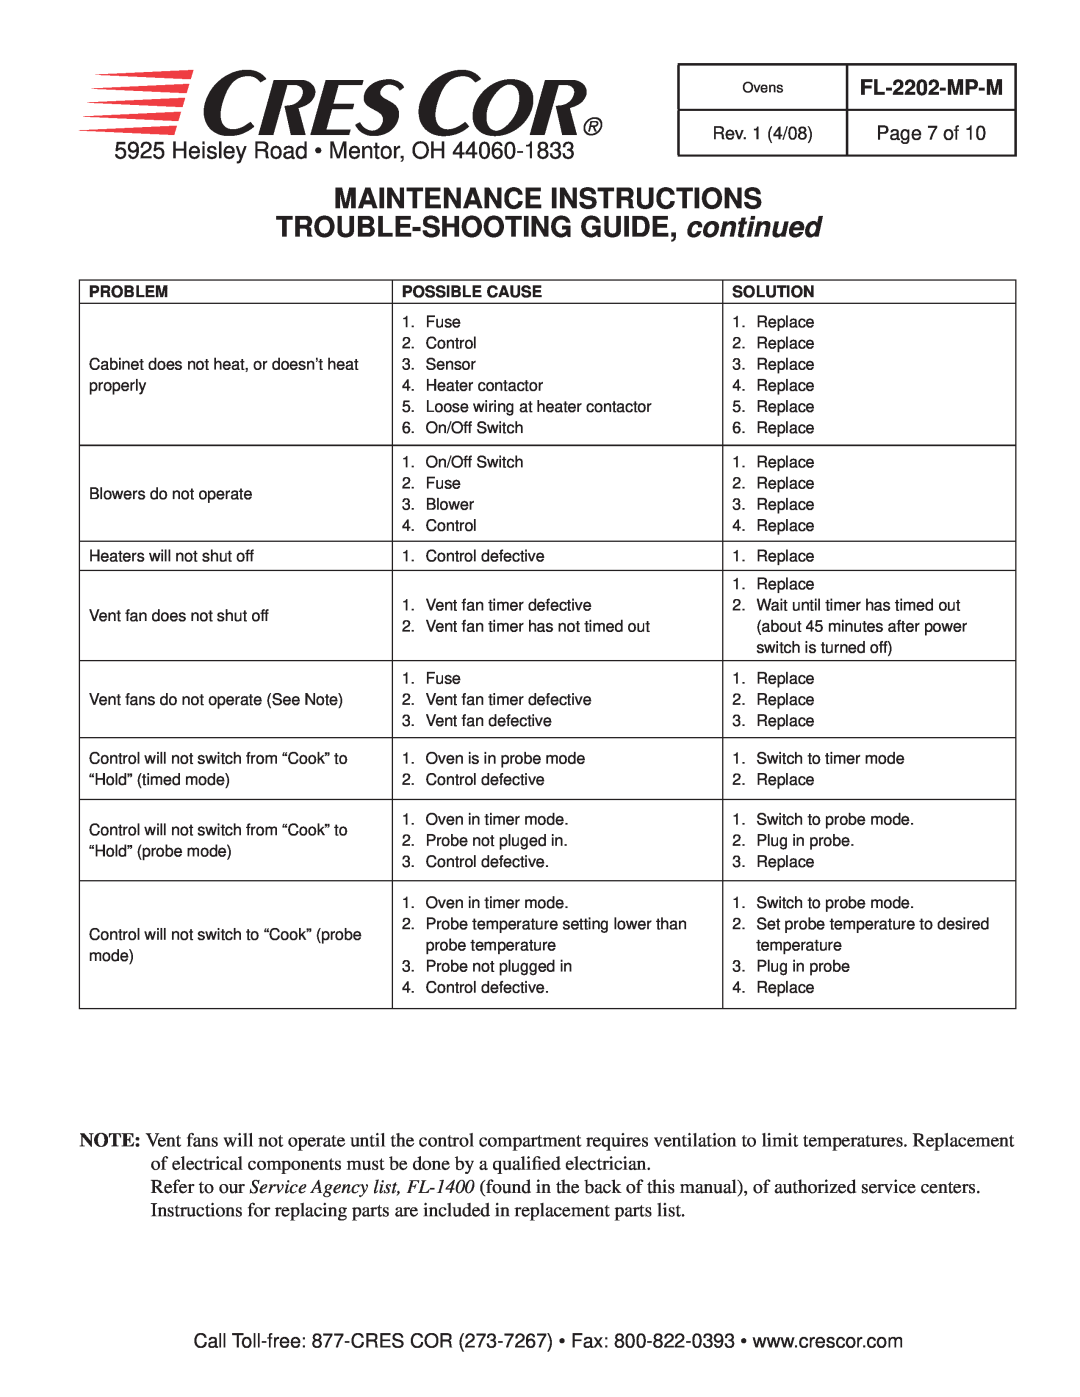 Cres Cor CO151HUA6 manual MAINTENANCE INSTRUCTIONS TROUBLE-SHOOTING GUIDE, continued, Heisley Road Mentor, OH, FL-2202-MP-M 